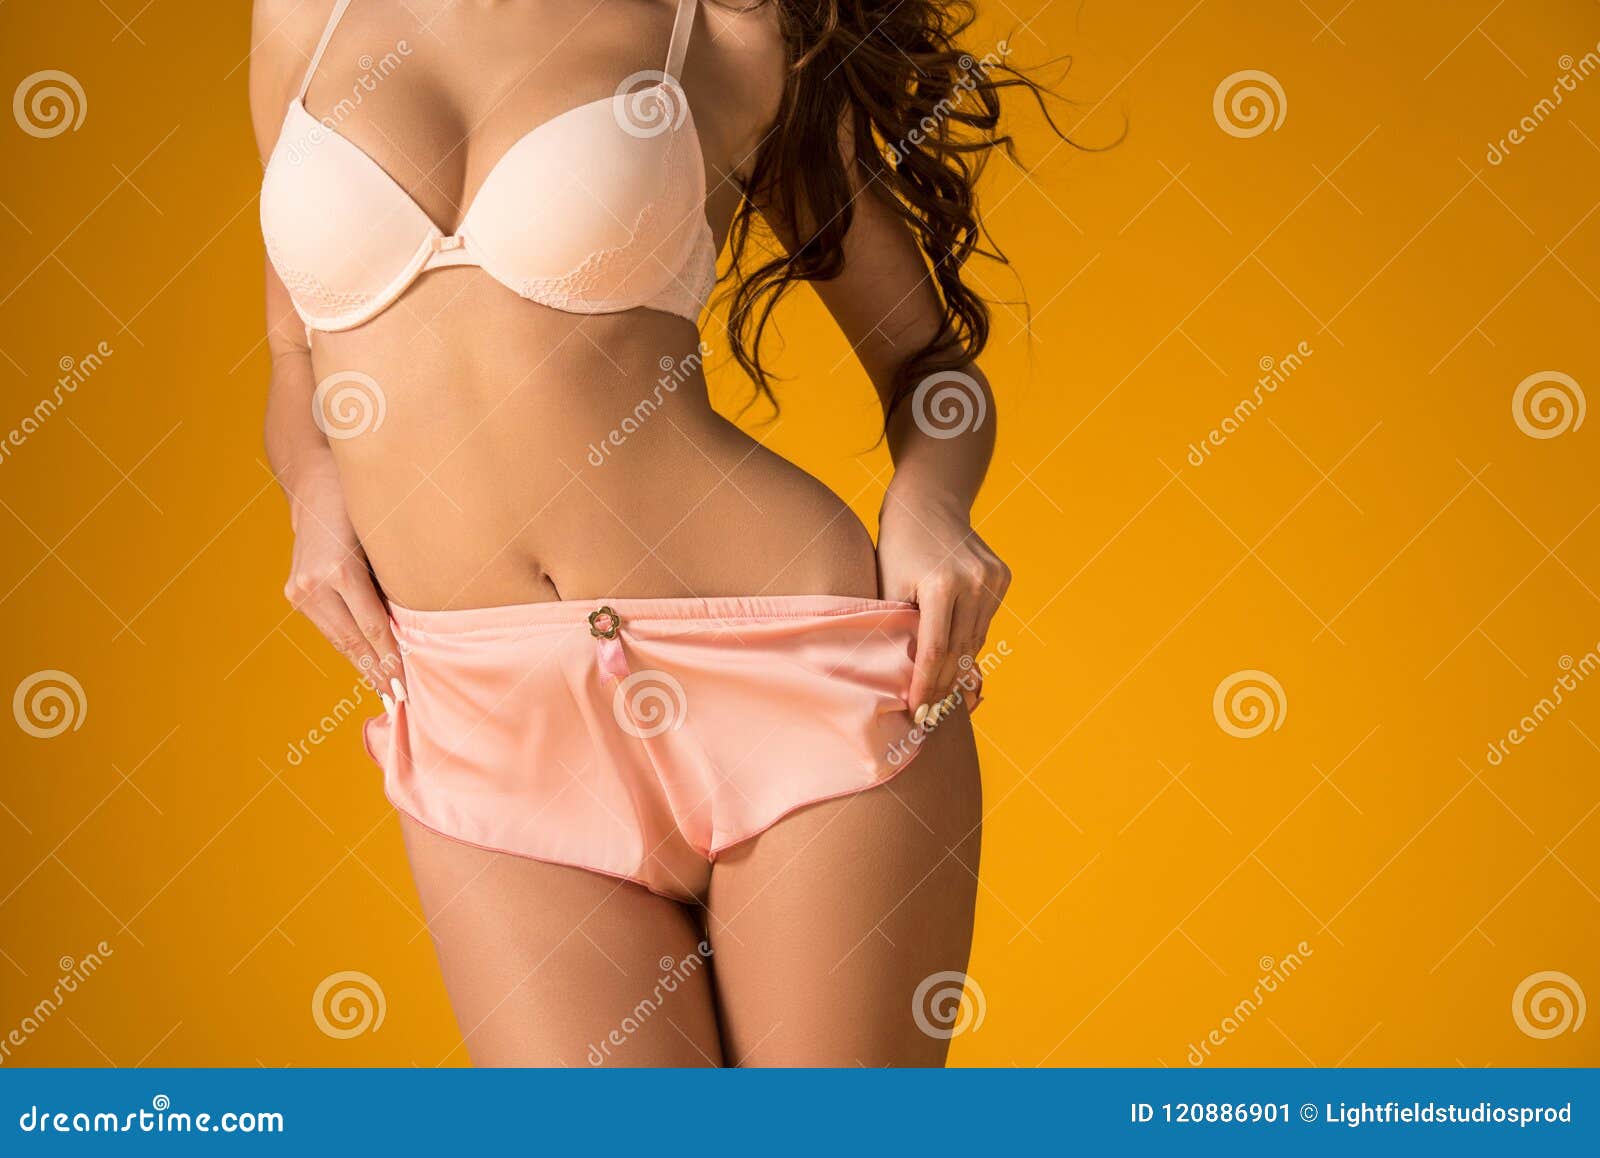 Cropped Image of Girl Taking Off Panties Stock Image - Image of people,  young: 120886901